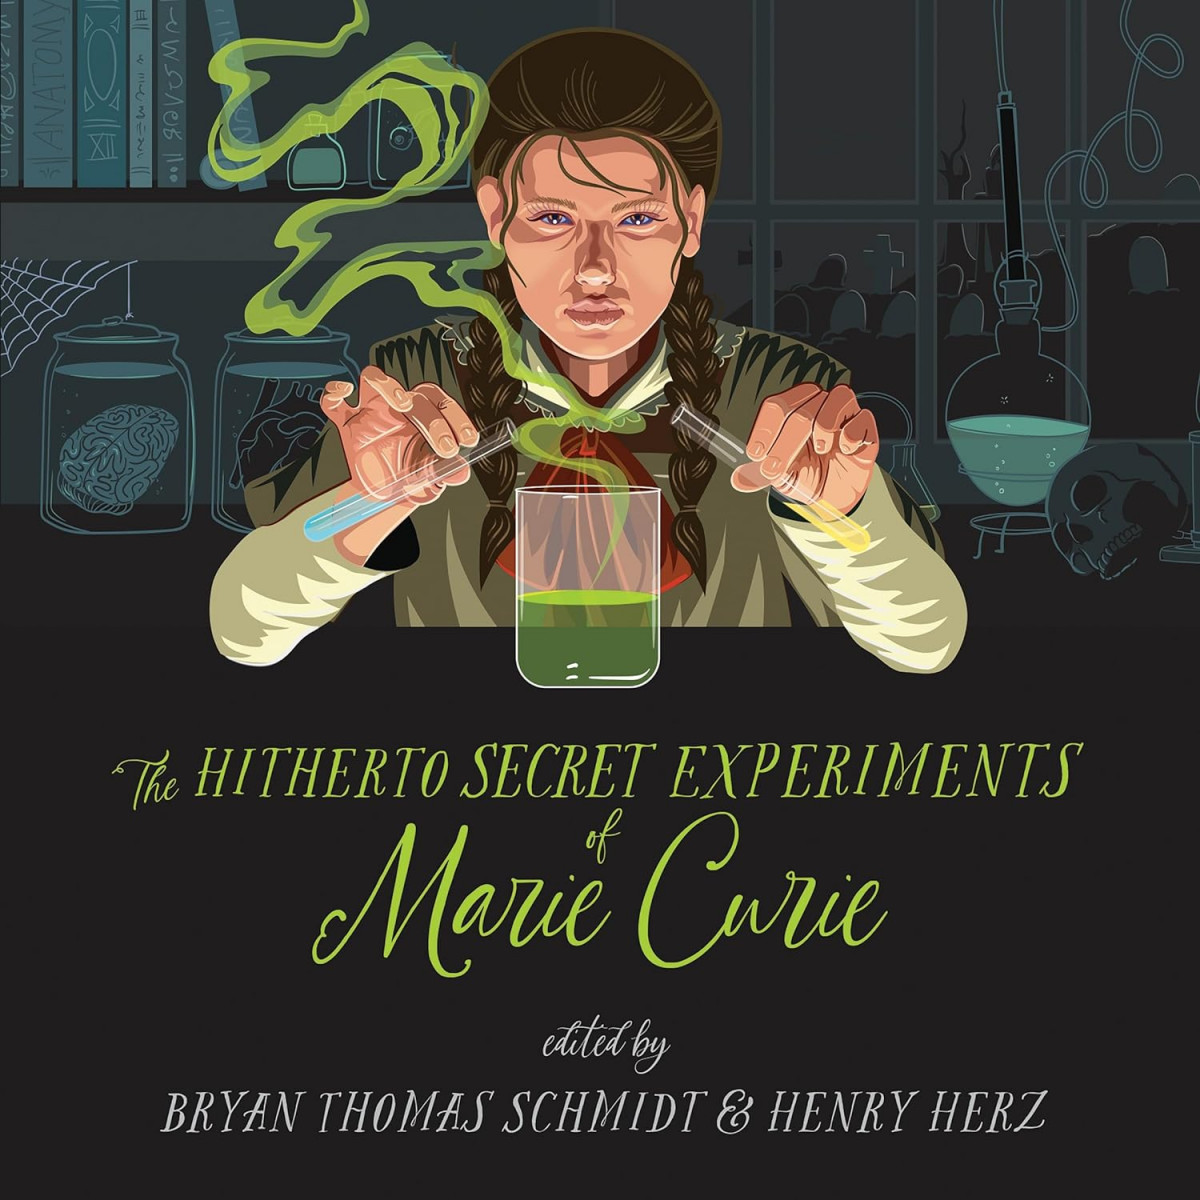 The Hitherto Secret Experiments of Marie Curie, edited by Bryan Thomas Schmidt and Henry Herz